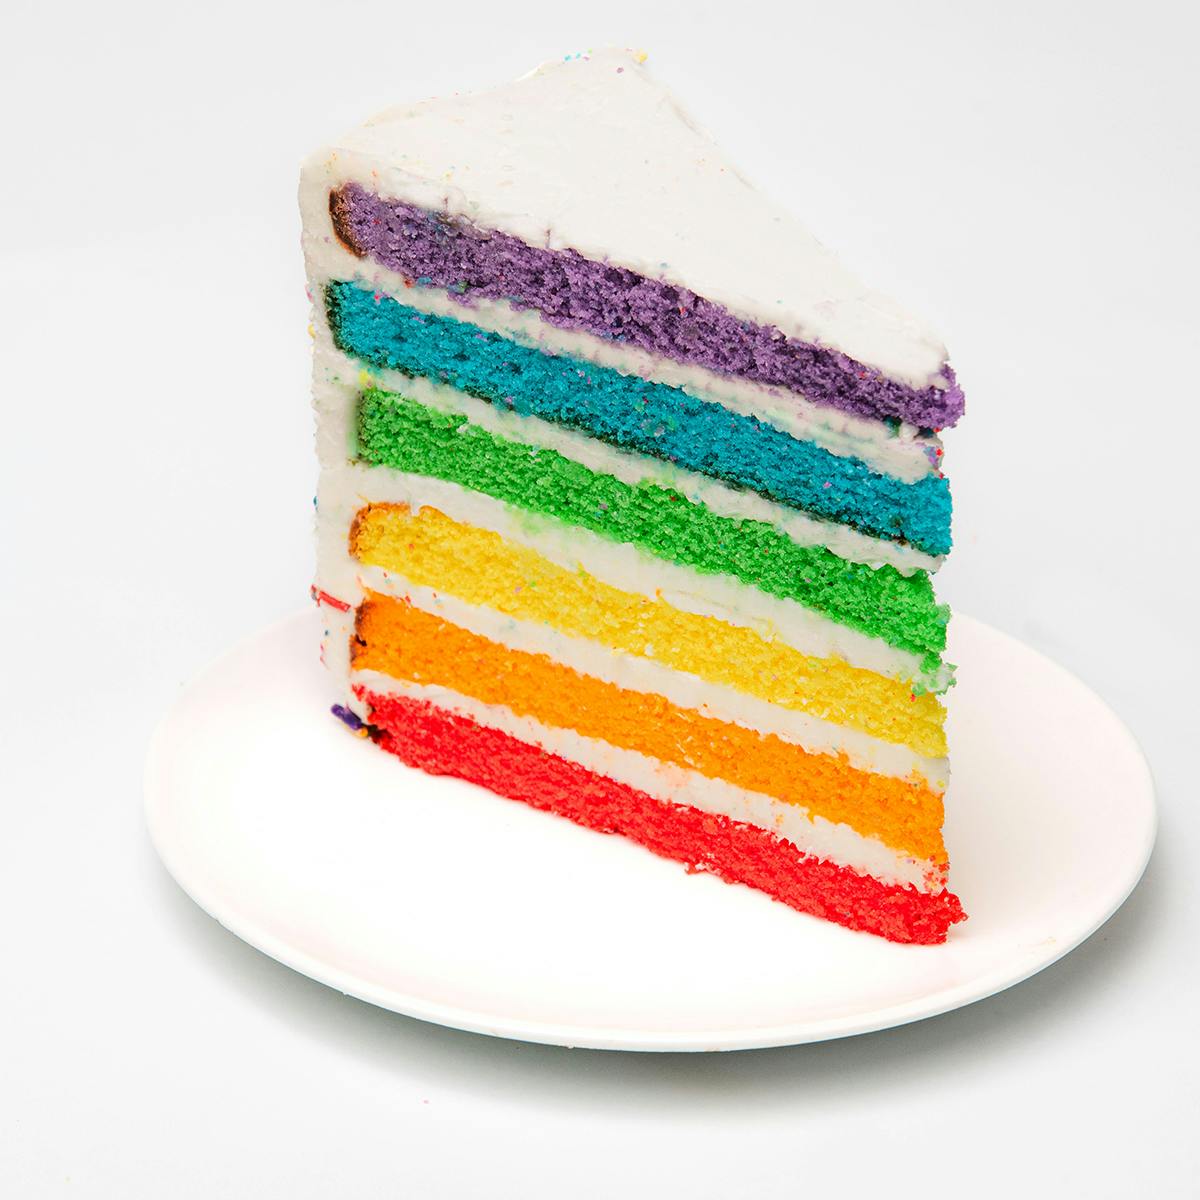 Cake Slices with Same or Next Day Delivery in London – Punk cake